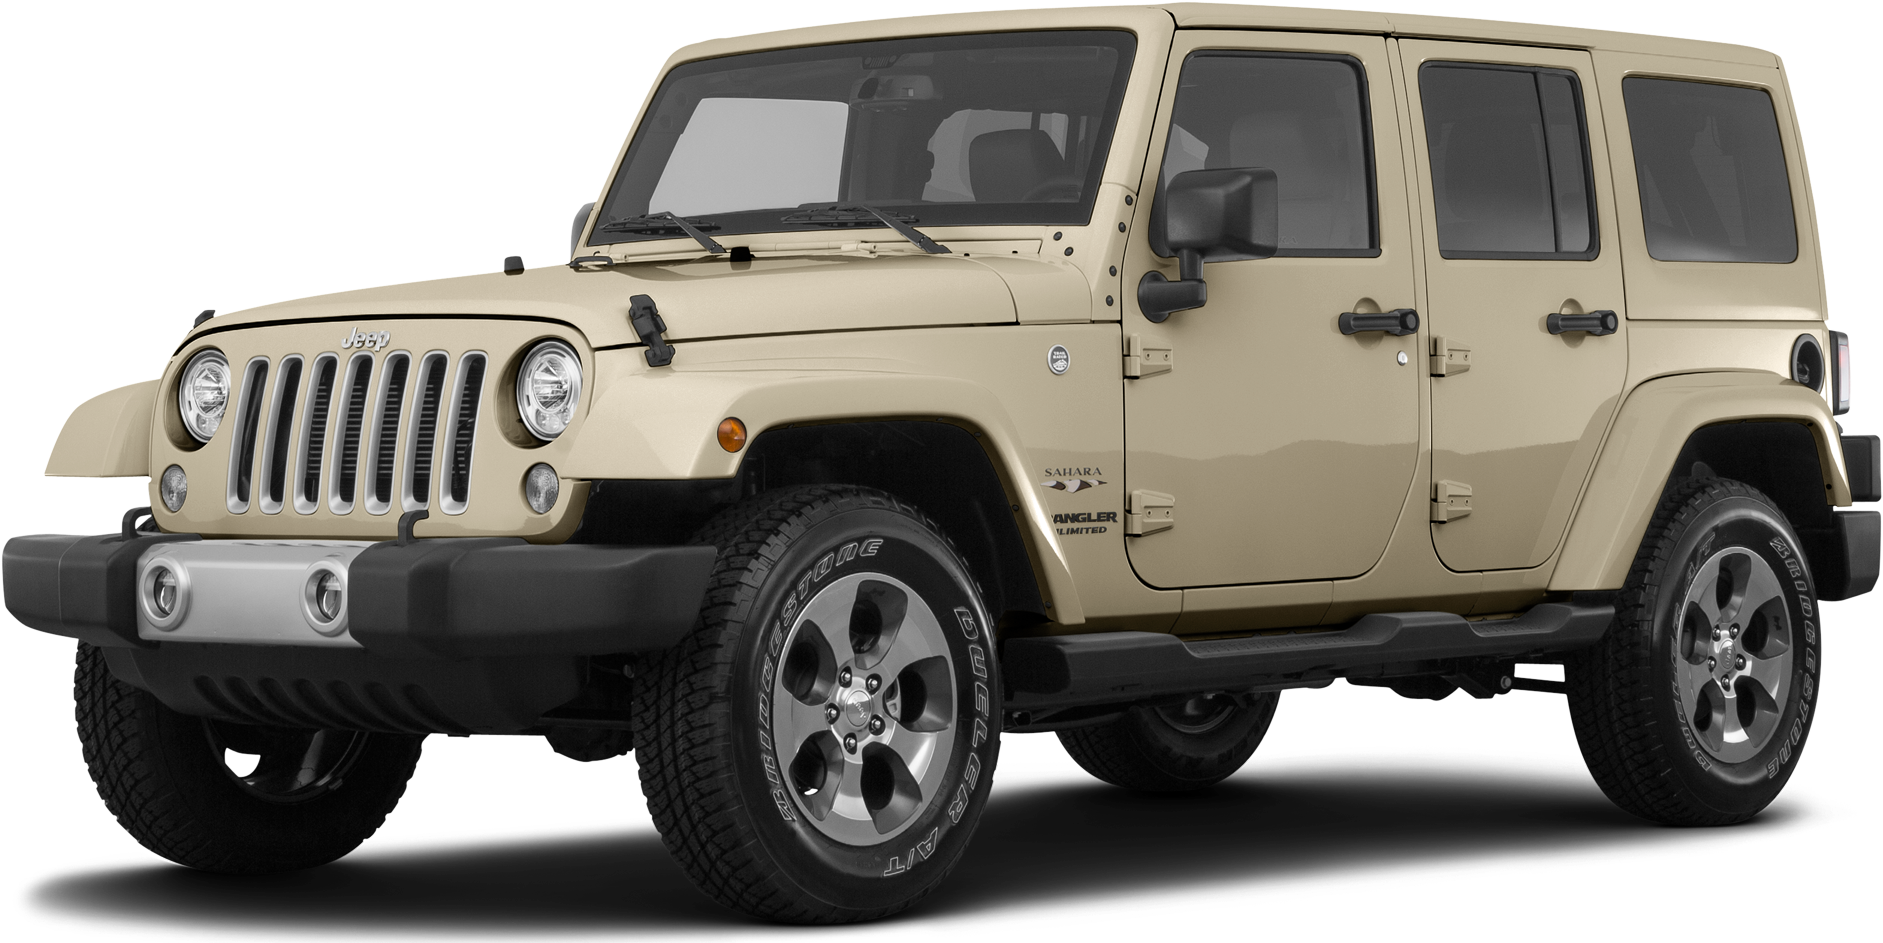 2018 Jeep Wrangler Unlimited Specs and Features